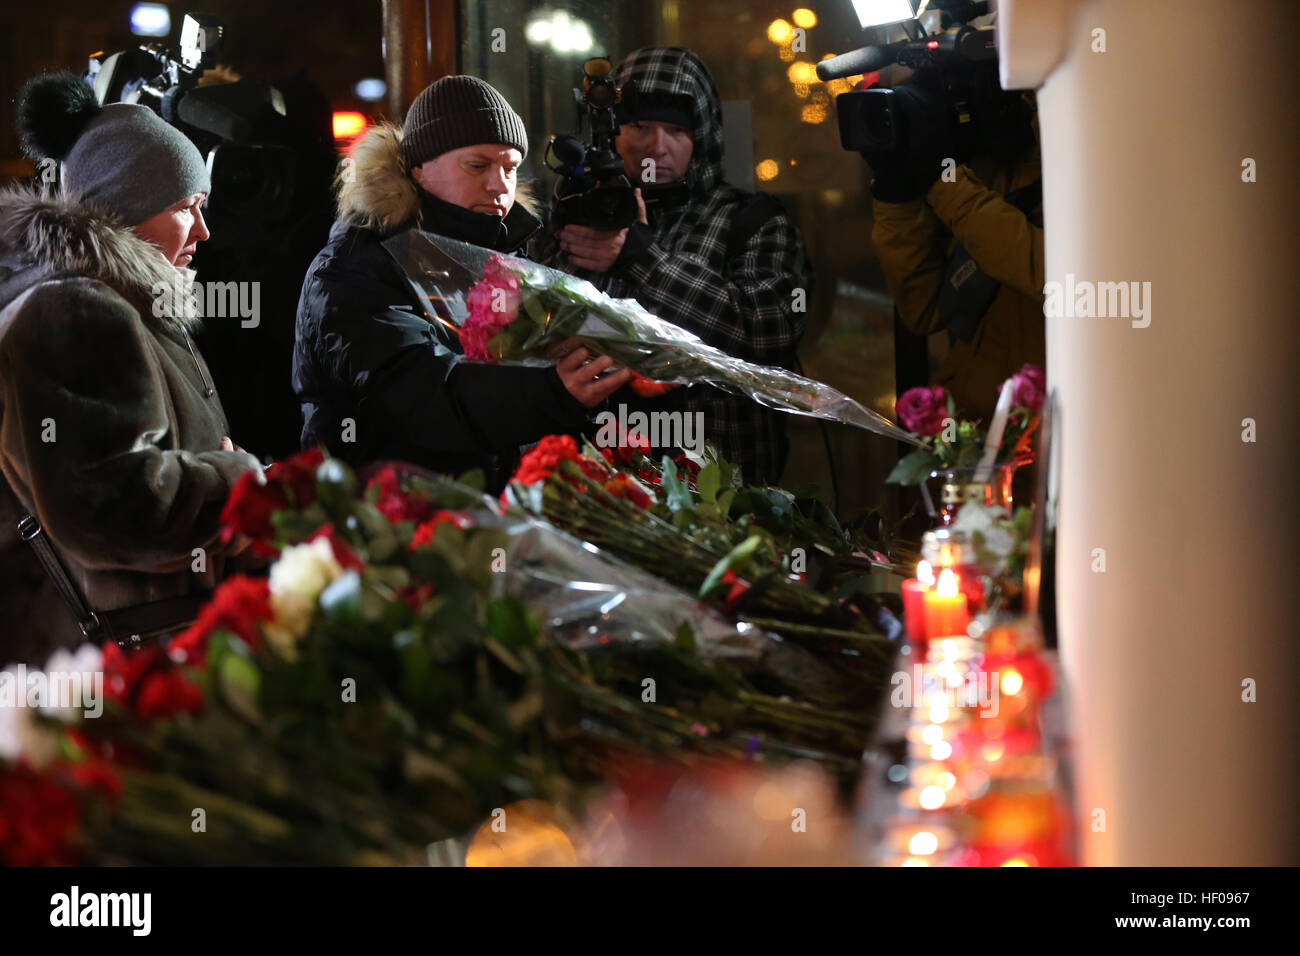 Moscow, Russia. 25th December, 2016. People lay flowers at the Alexandrov Hall, a rehearsal room of the Alexandrov Ensemble, as they pay tribute to the victims of a Russian Defense Ministry plane crash. A Tupolev Tu-154 plane of the Russian Defense Ministry with 92 people on board crashed into the Black Sea near the city of Sochi on December 25, 2016. The plane was carrying members of the Alexandrov Ensemble, Russian servicemen and journalists to Russia's Hmeymim air base in Syria. Fragments of the plane were found about 1.5km from Sochi coastline. © Victor Vytolskiy/Alamy Live News Stock Photo